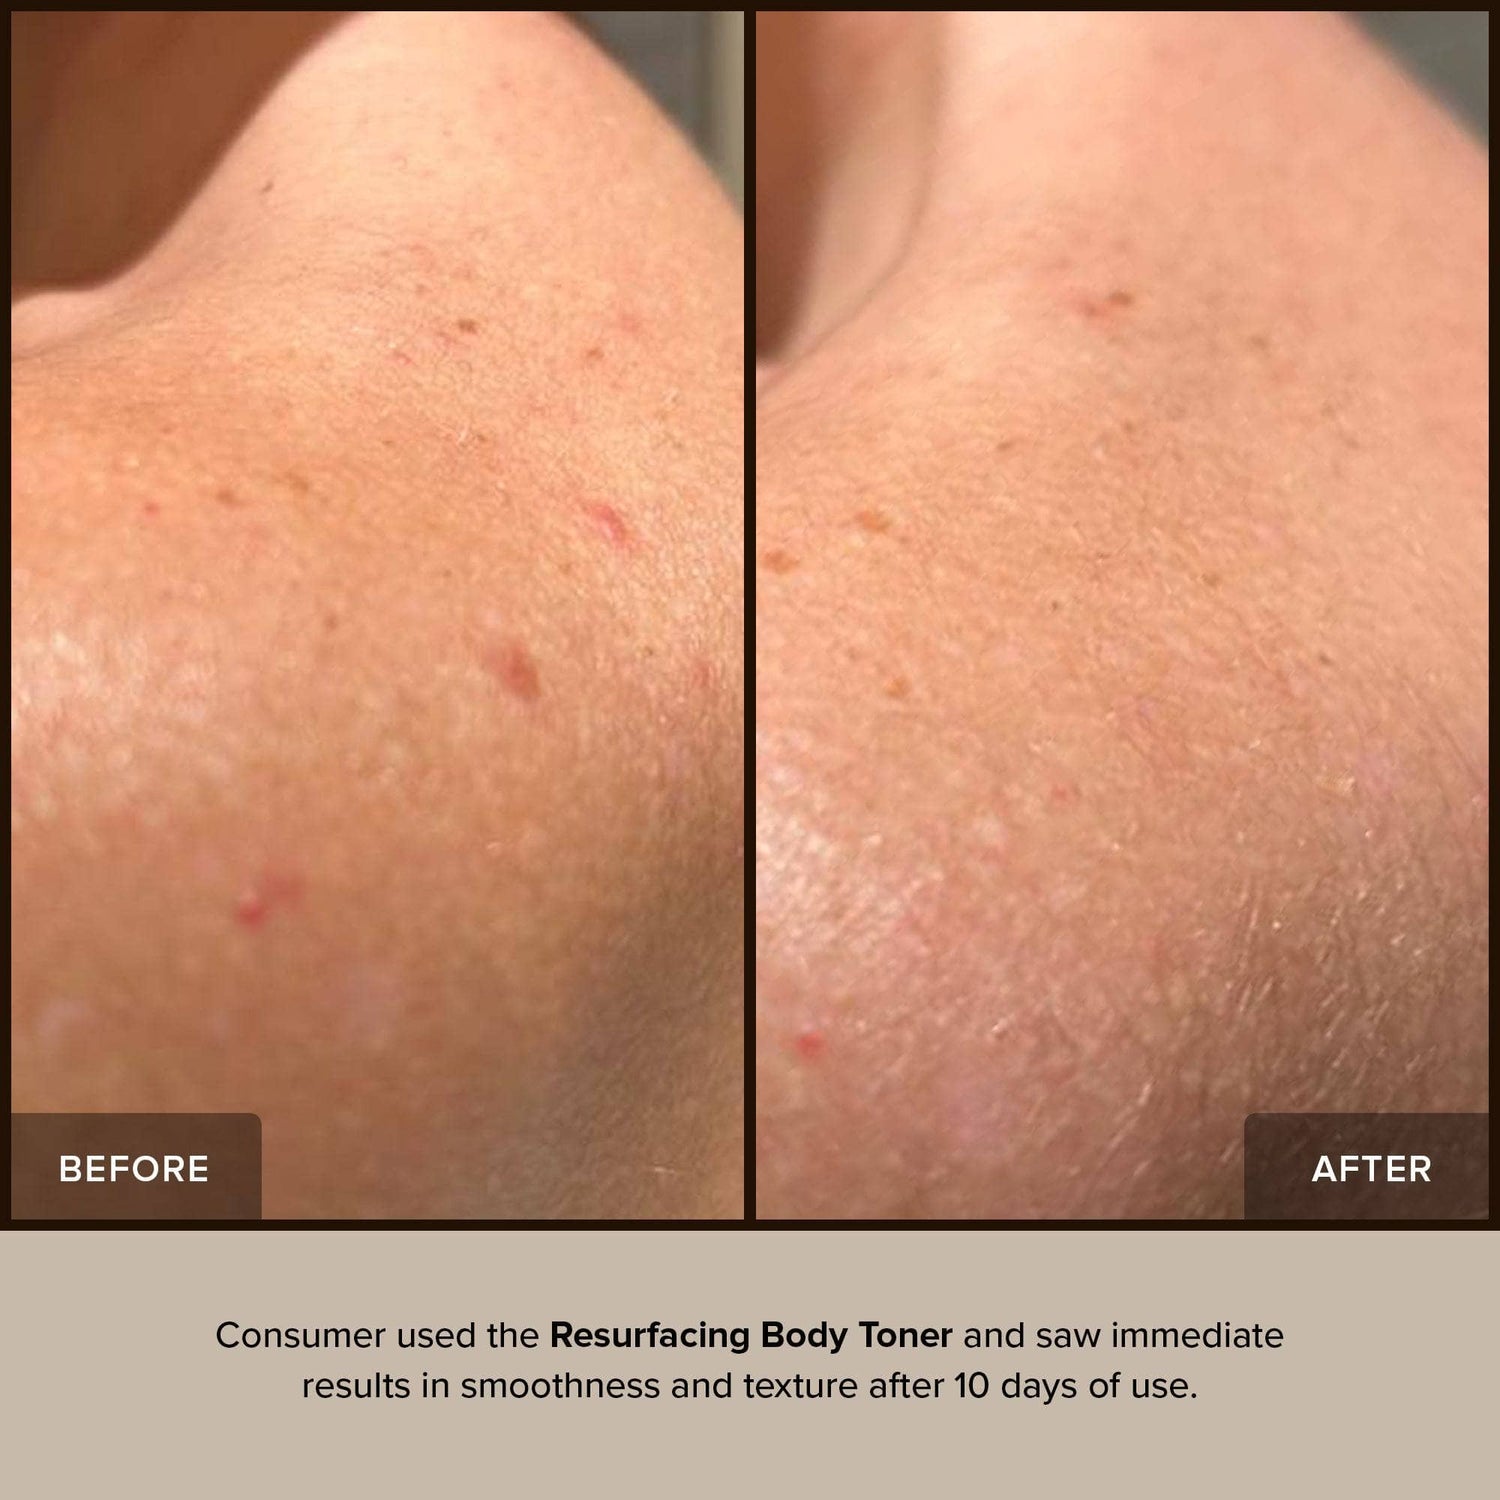 Before and after skin after using Resurfacing Body Toner for 10 days